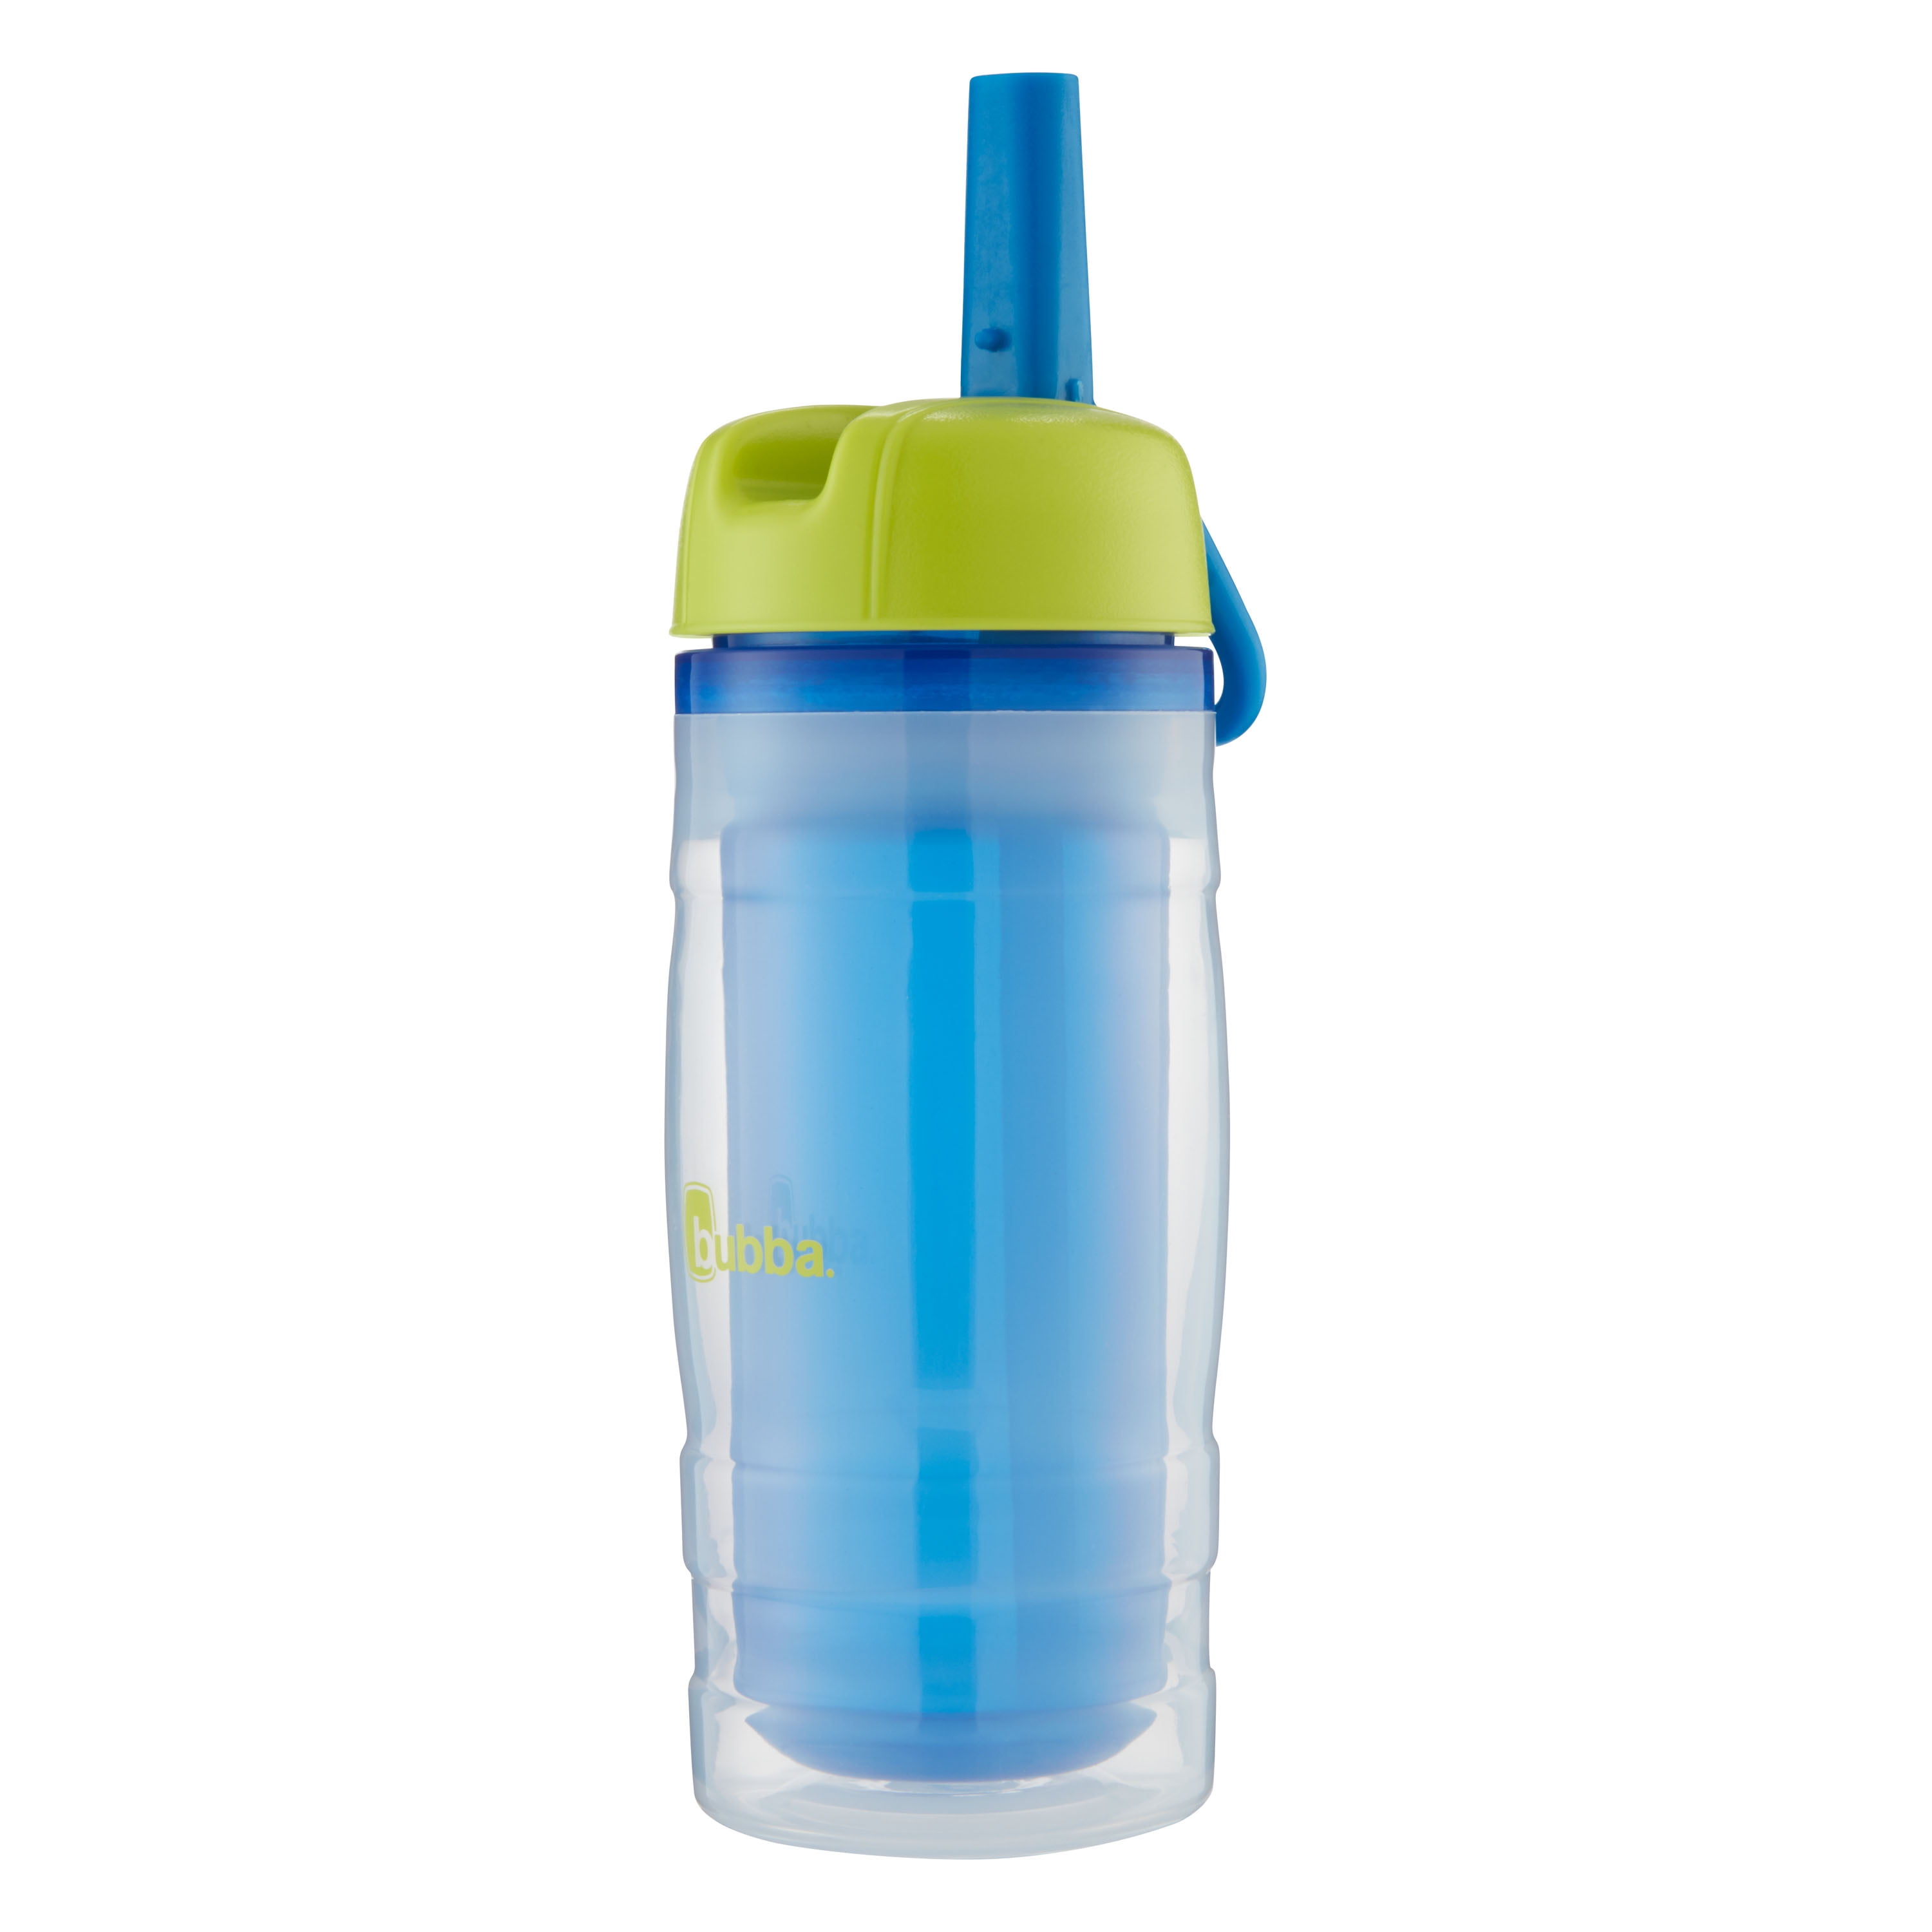 bubba Raptor Dual-Wall Insulated Kids Water Bottle with Flip-Up